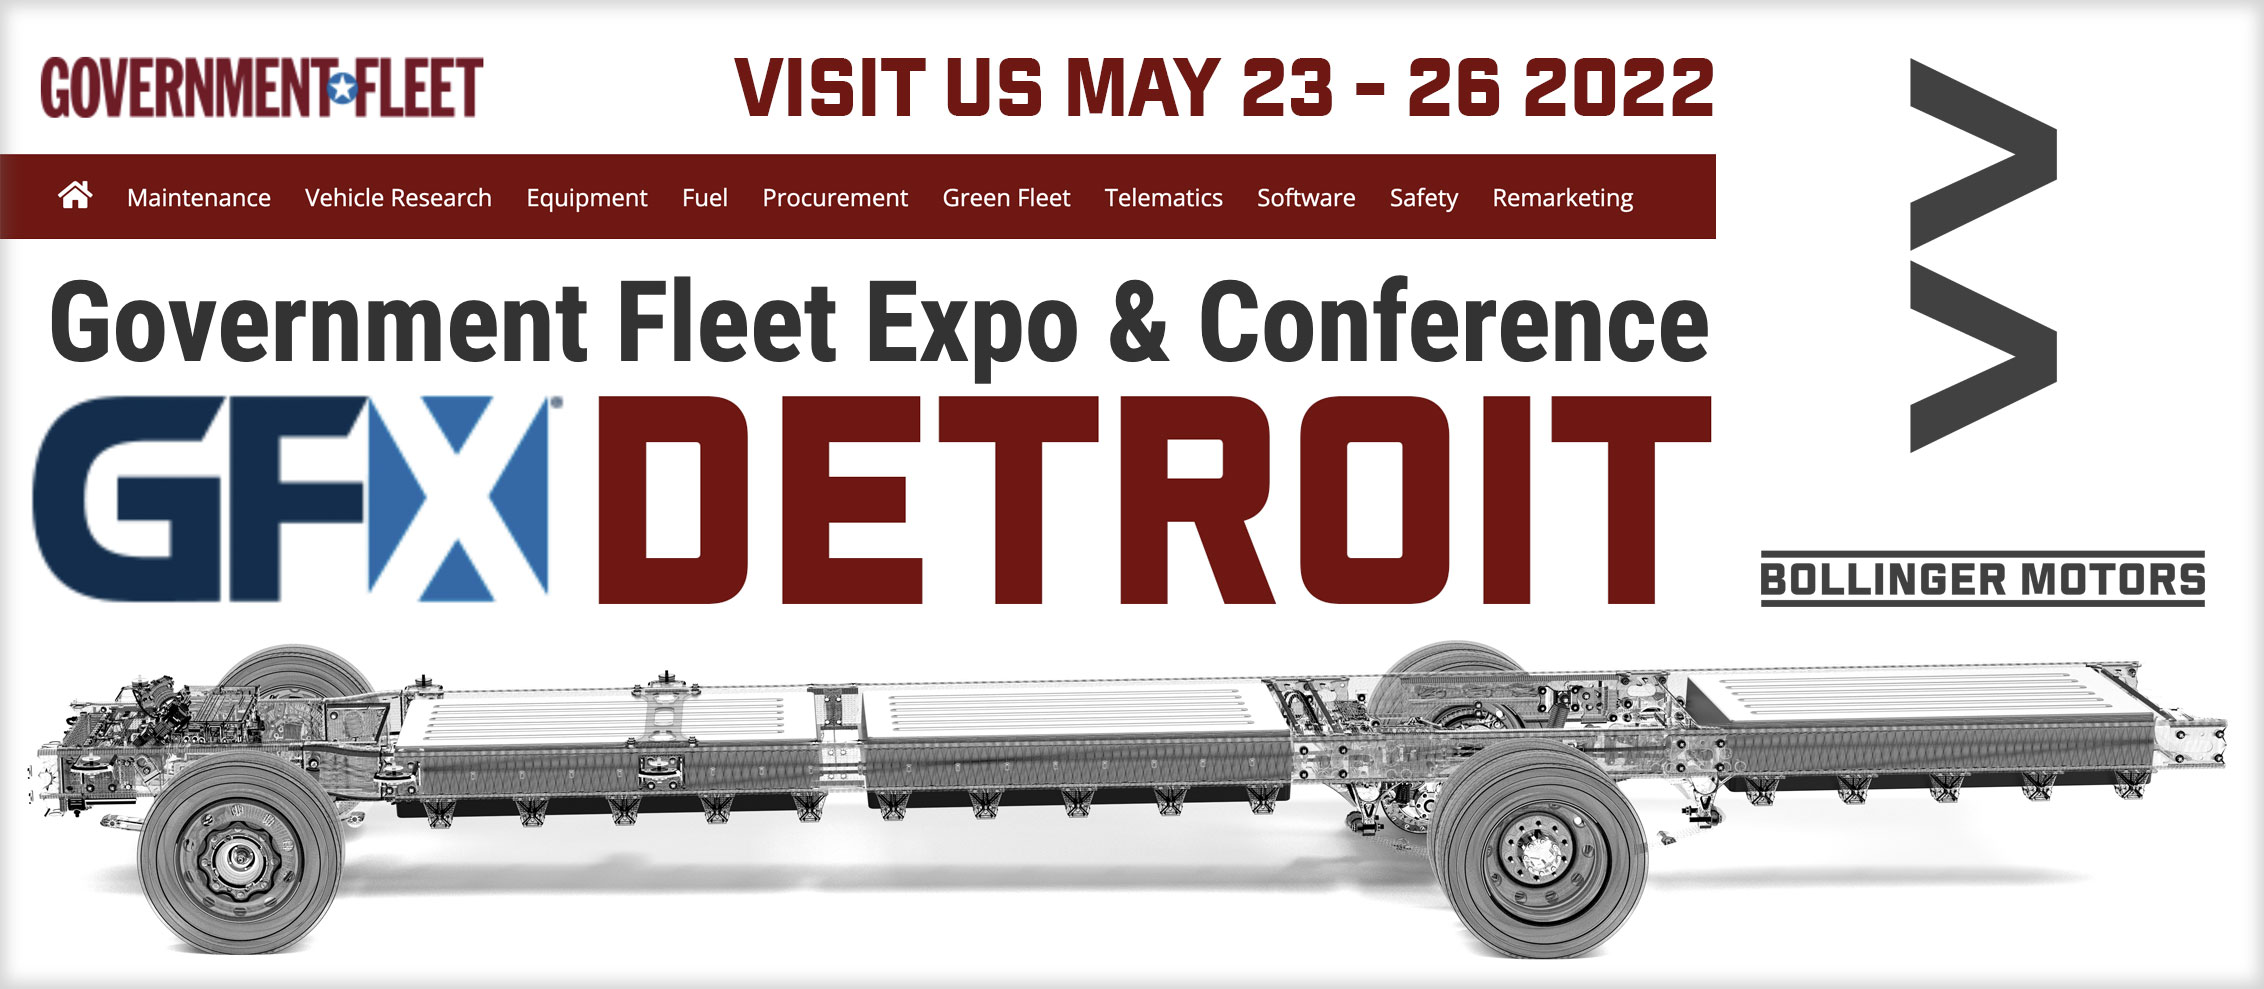 The Government Fleet Expo & Conference (GFX) will take place May 23-25 in Detroit. Join the nation's largest gathering of public fleet professionals for education, networking, and exhibit floor innovations. GFX is known for its robust conference program, as well as its large and immersive exhibition. It serves as a true annual hub for public fleet professionals.